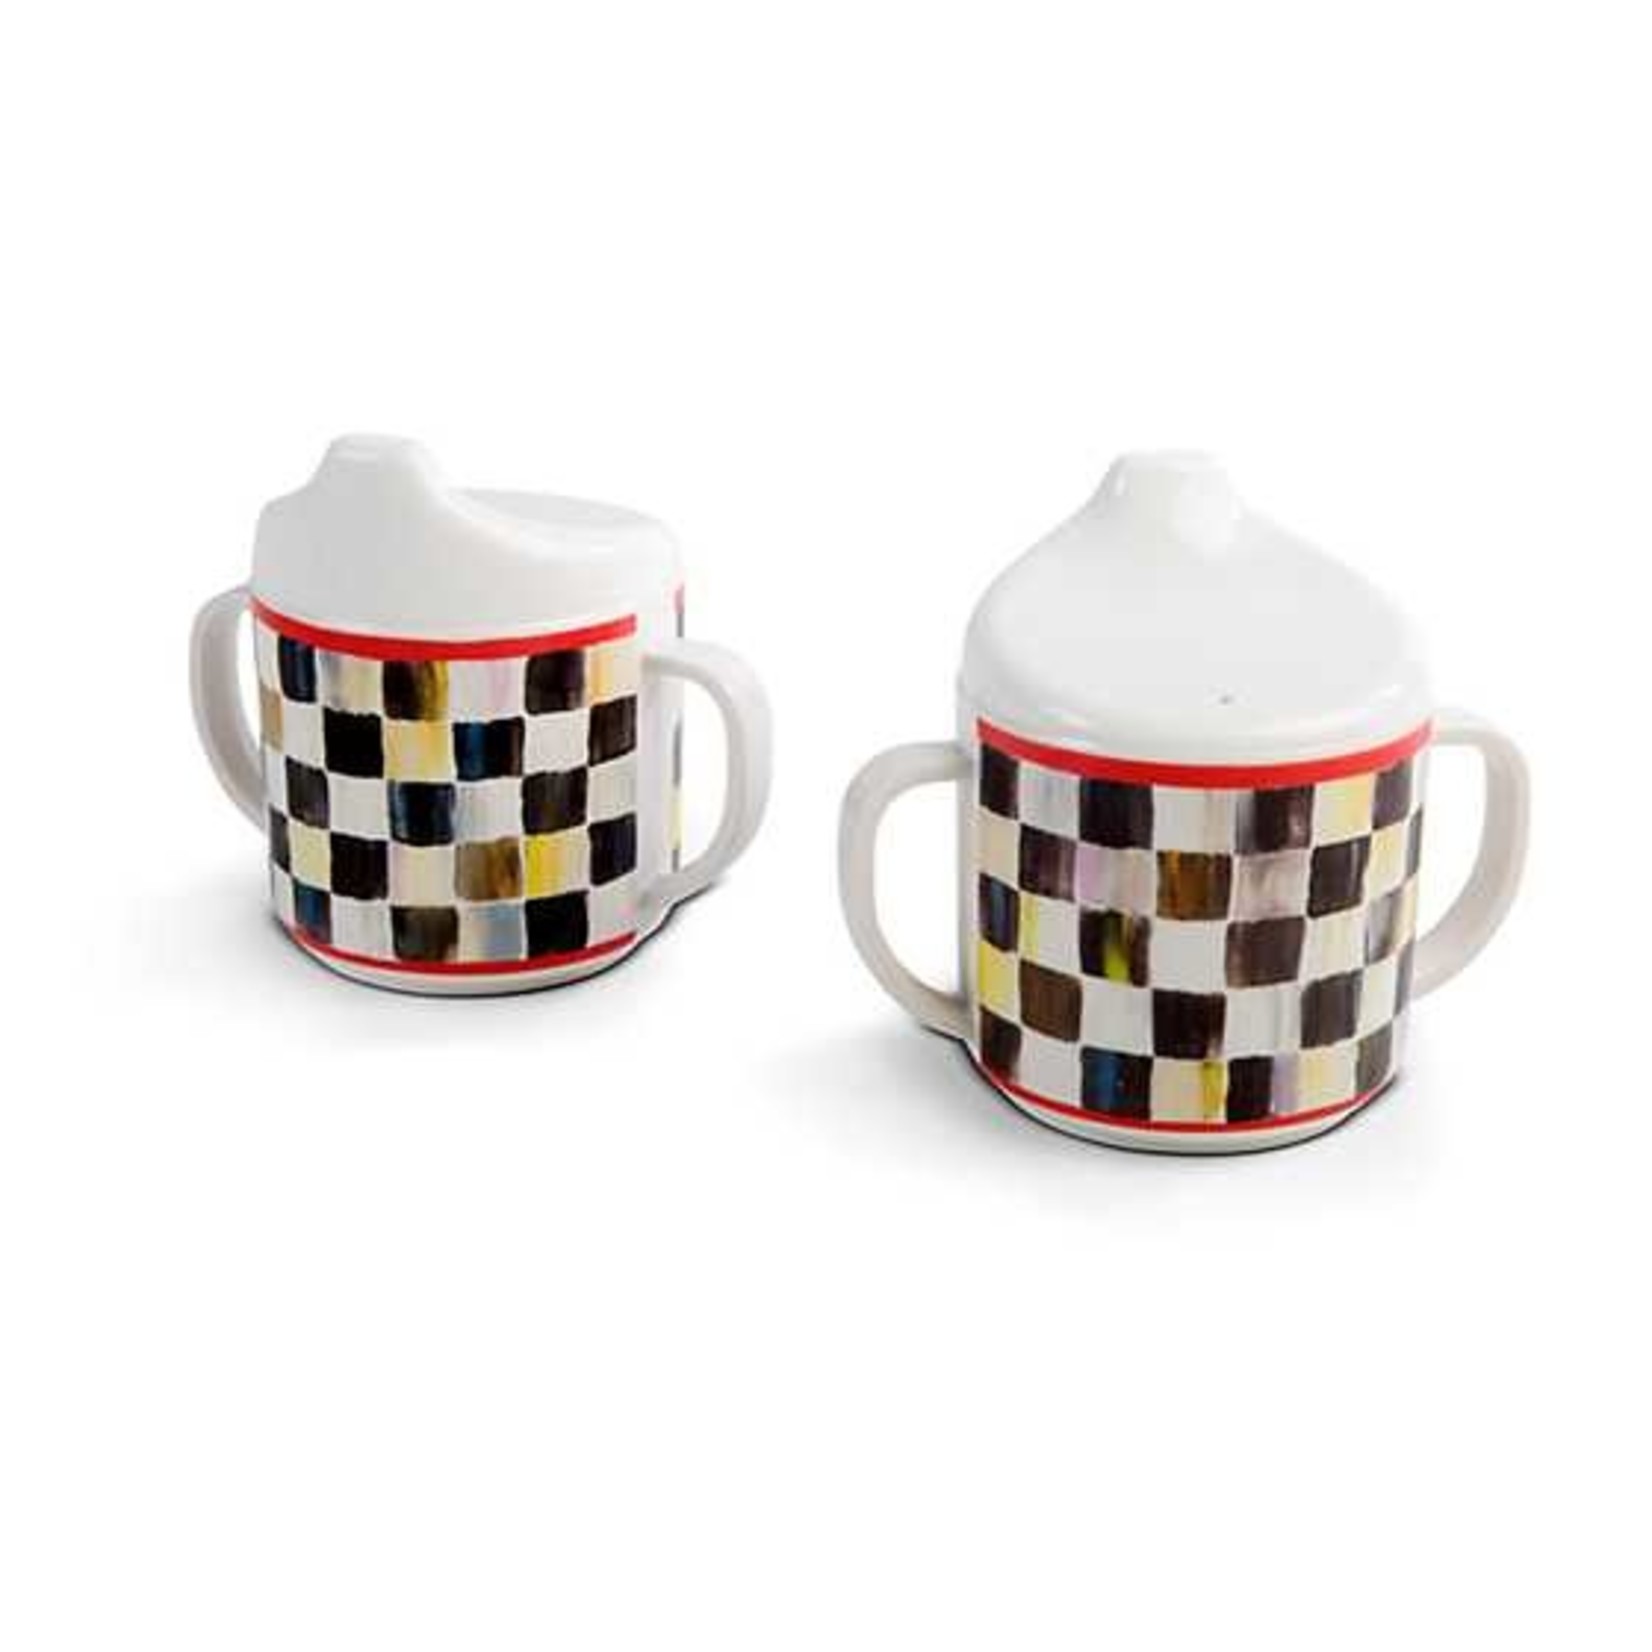 MacKenzie-Childs Courtly Check Sippy Cups - Set of 2